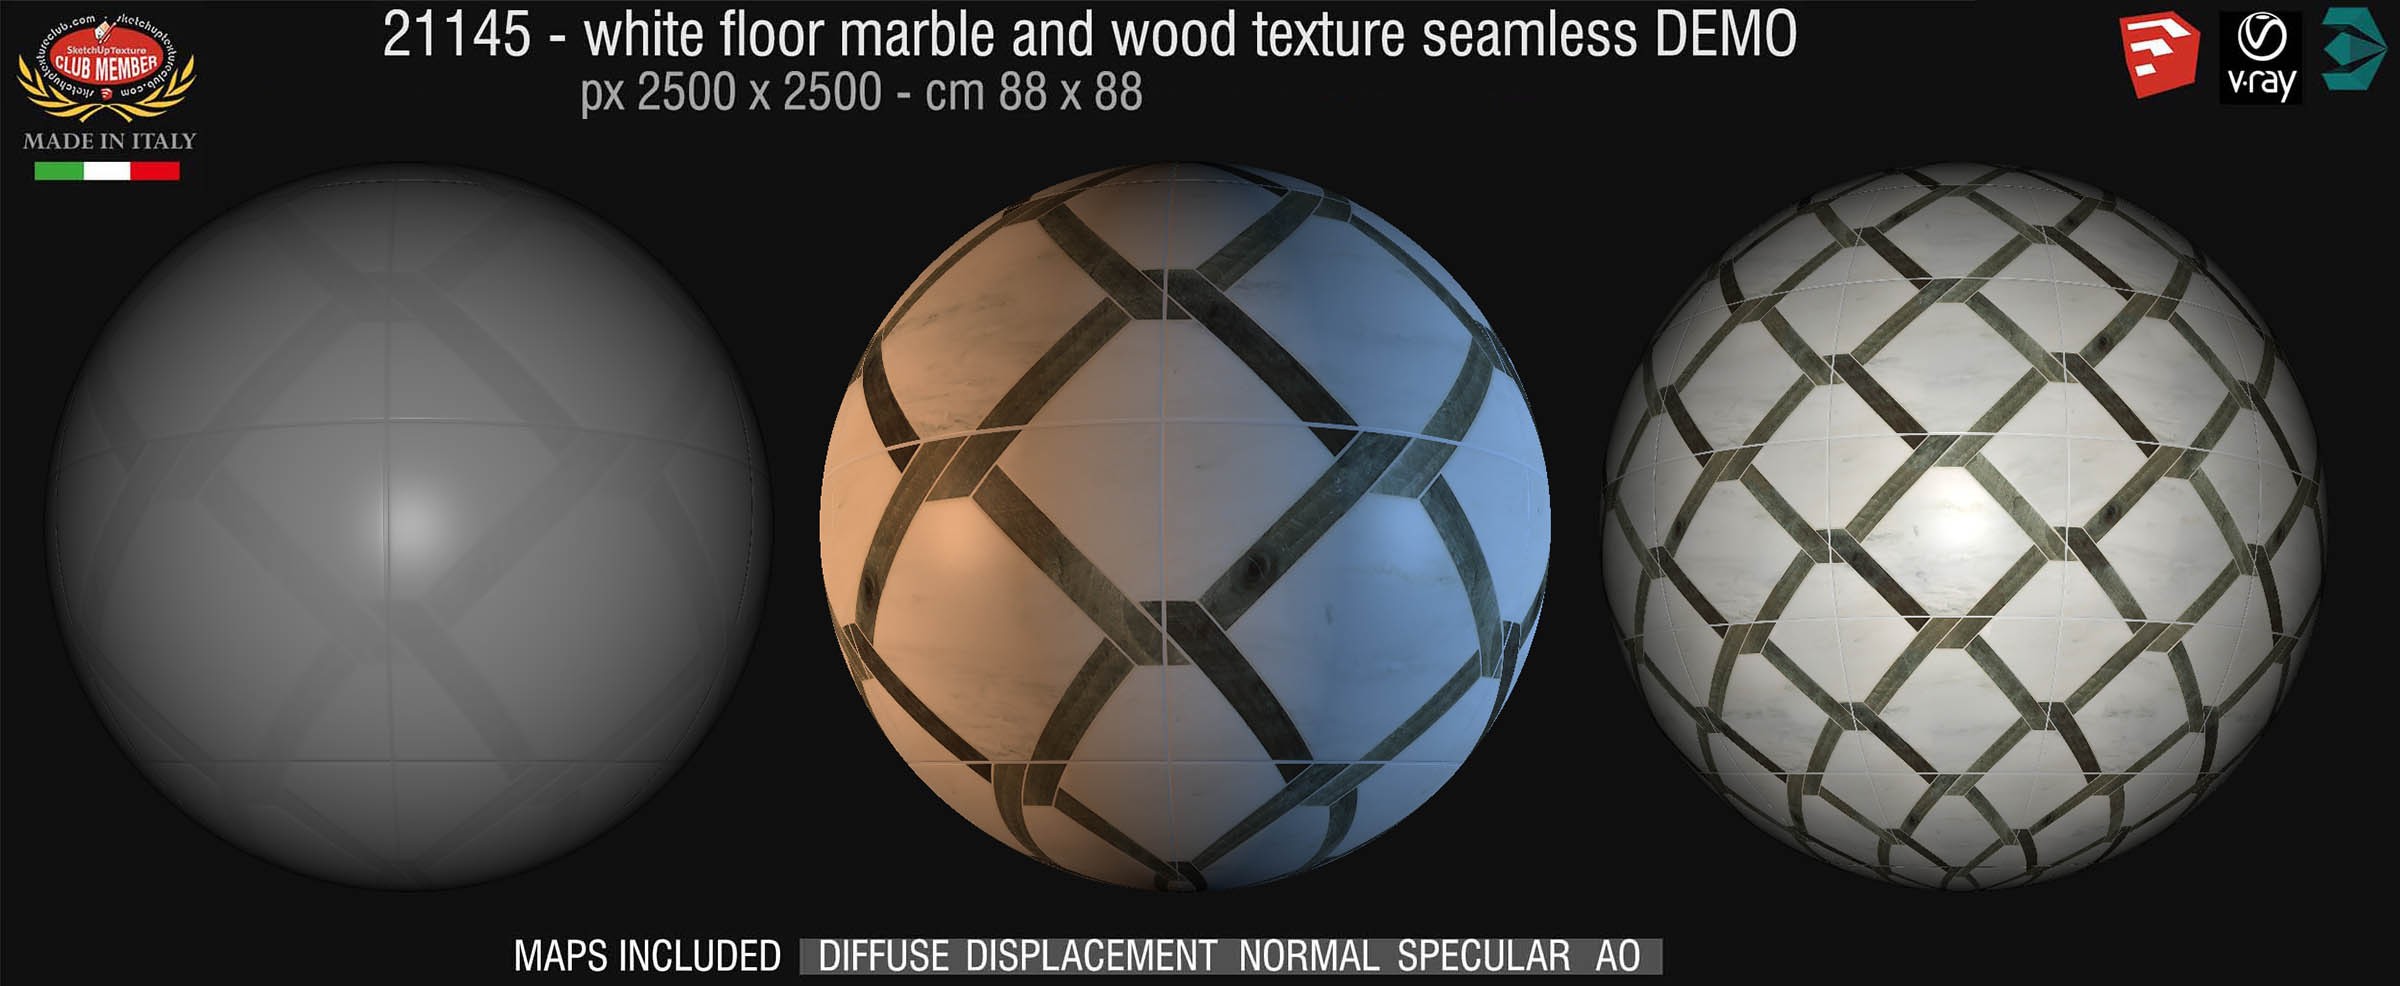 21145 White floor marble and wood texture seamless + maps DEMO